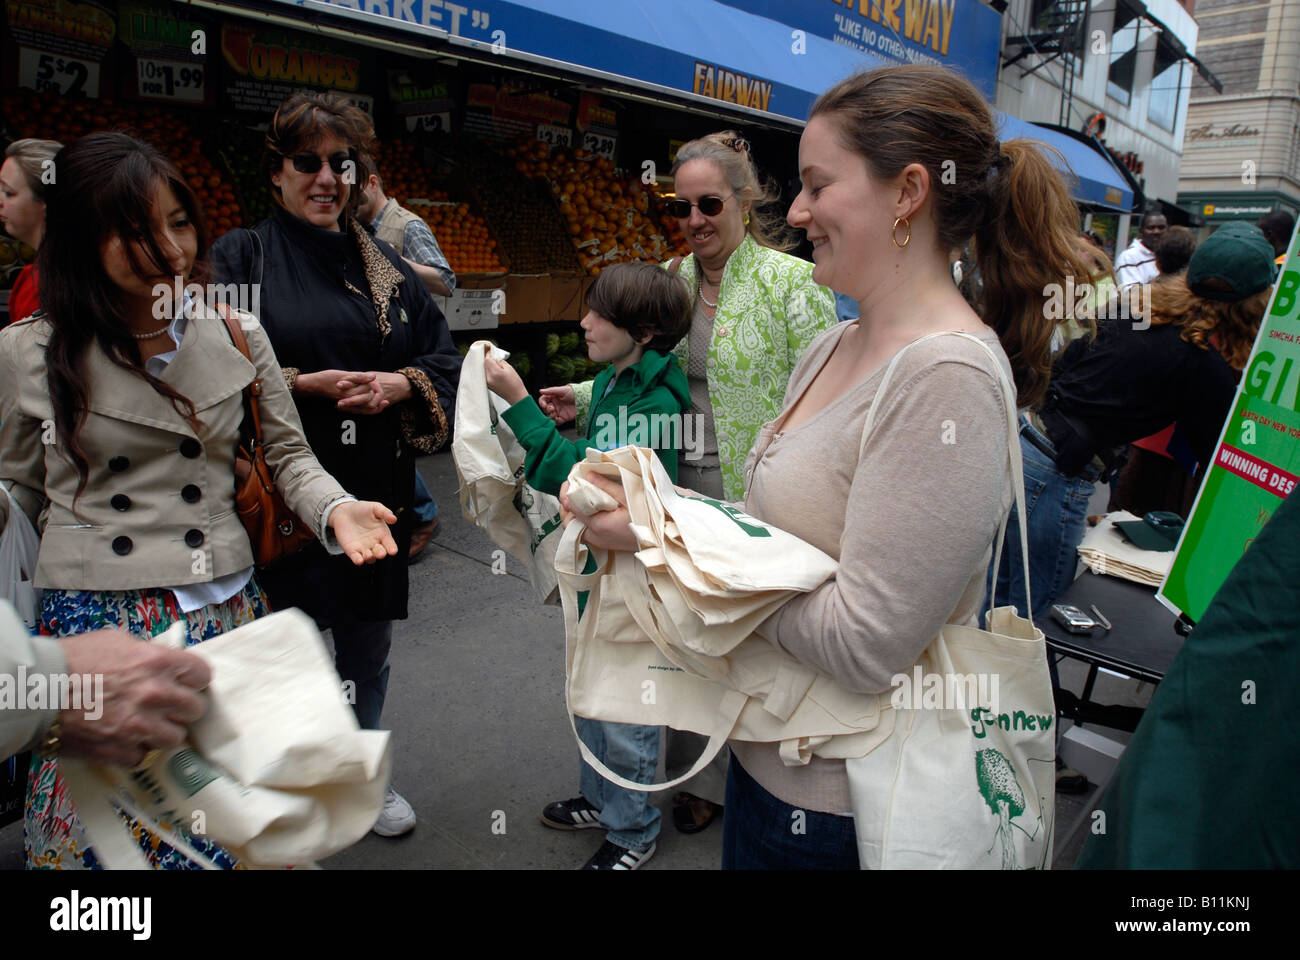 Volunteers in front of Fairway Supermarket in New York give away reusable canvas bags to shoppers to replace the plastic bags Stock Photo